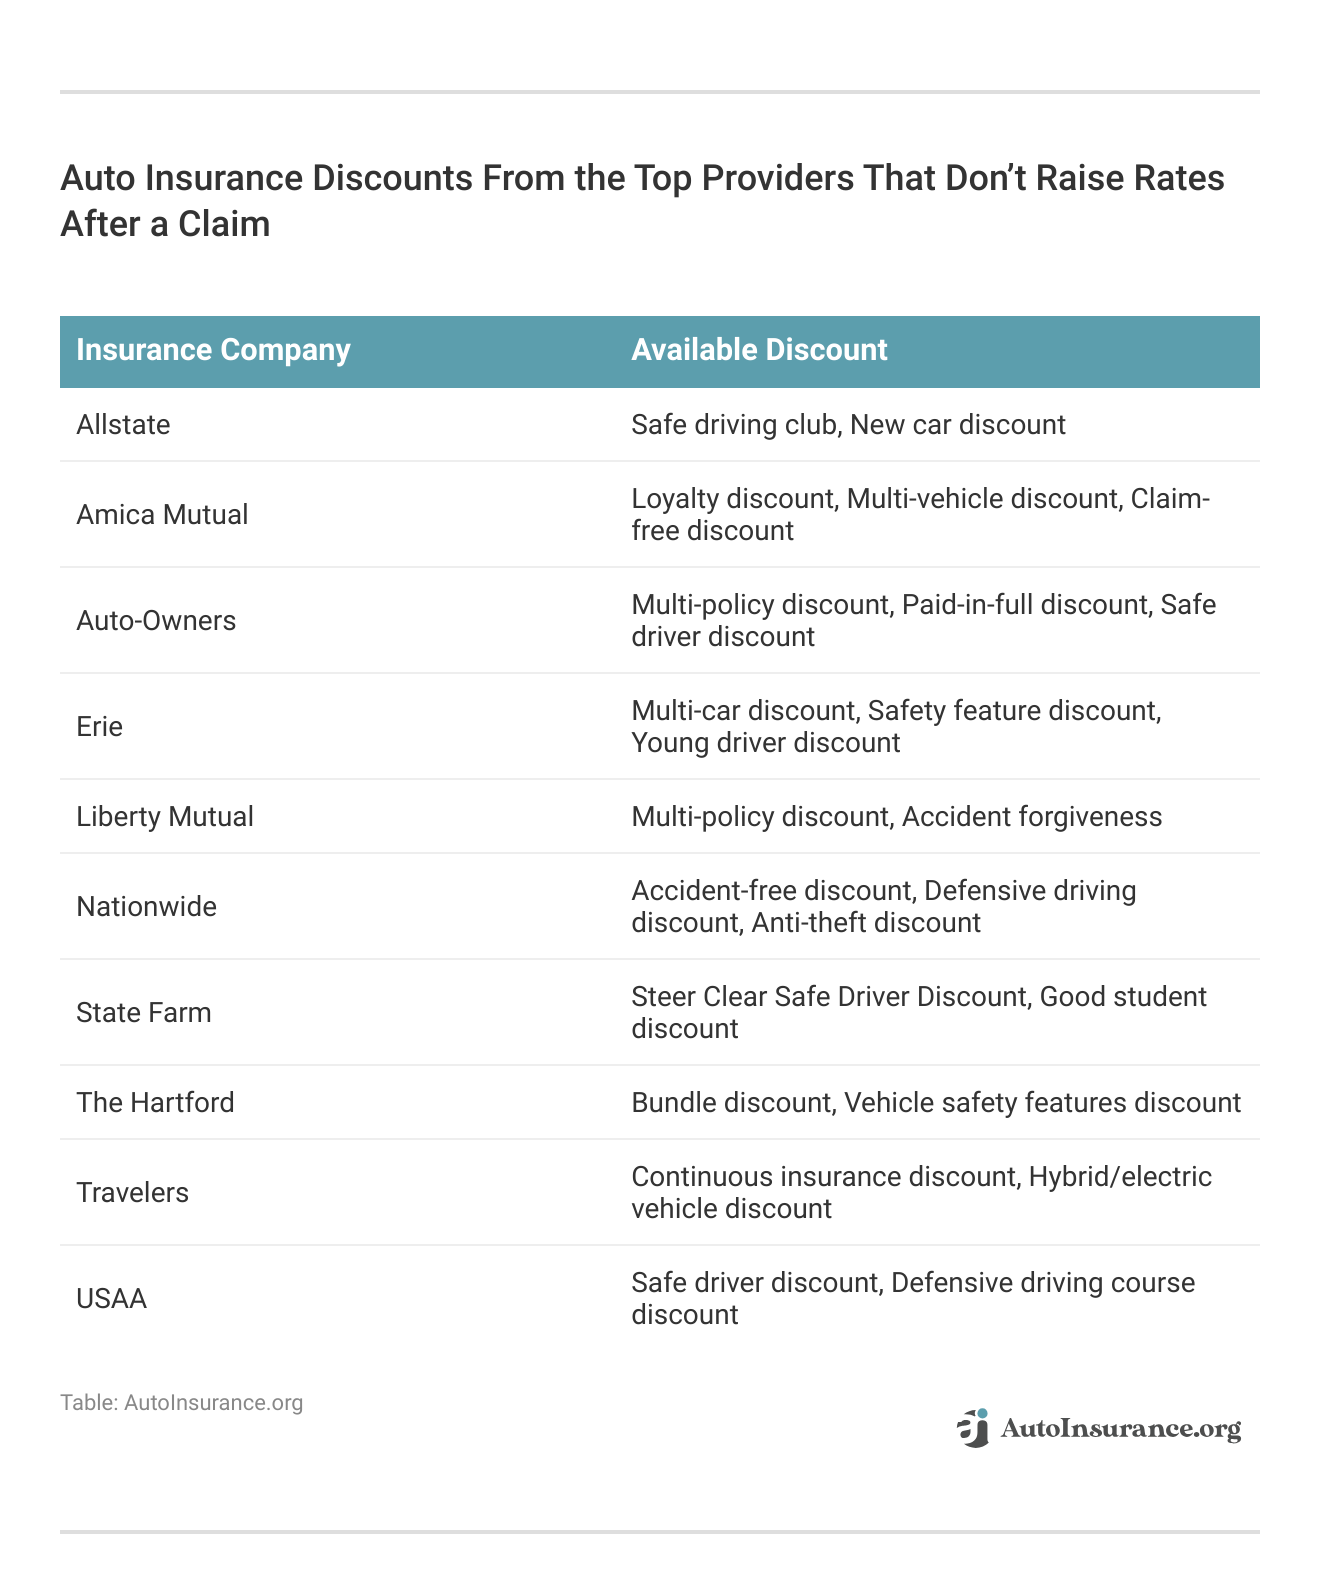 <h3>Auto Insurance Discounts From the Top Providers That Don’t Raise Rates After a Claim</h3>